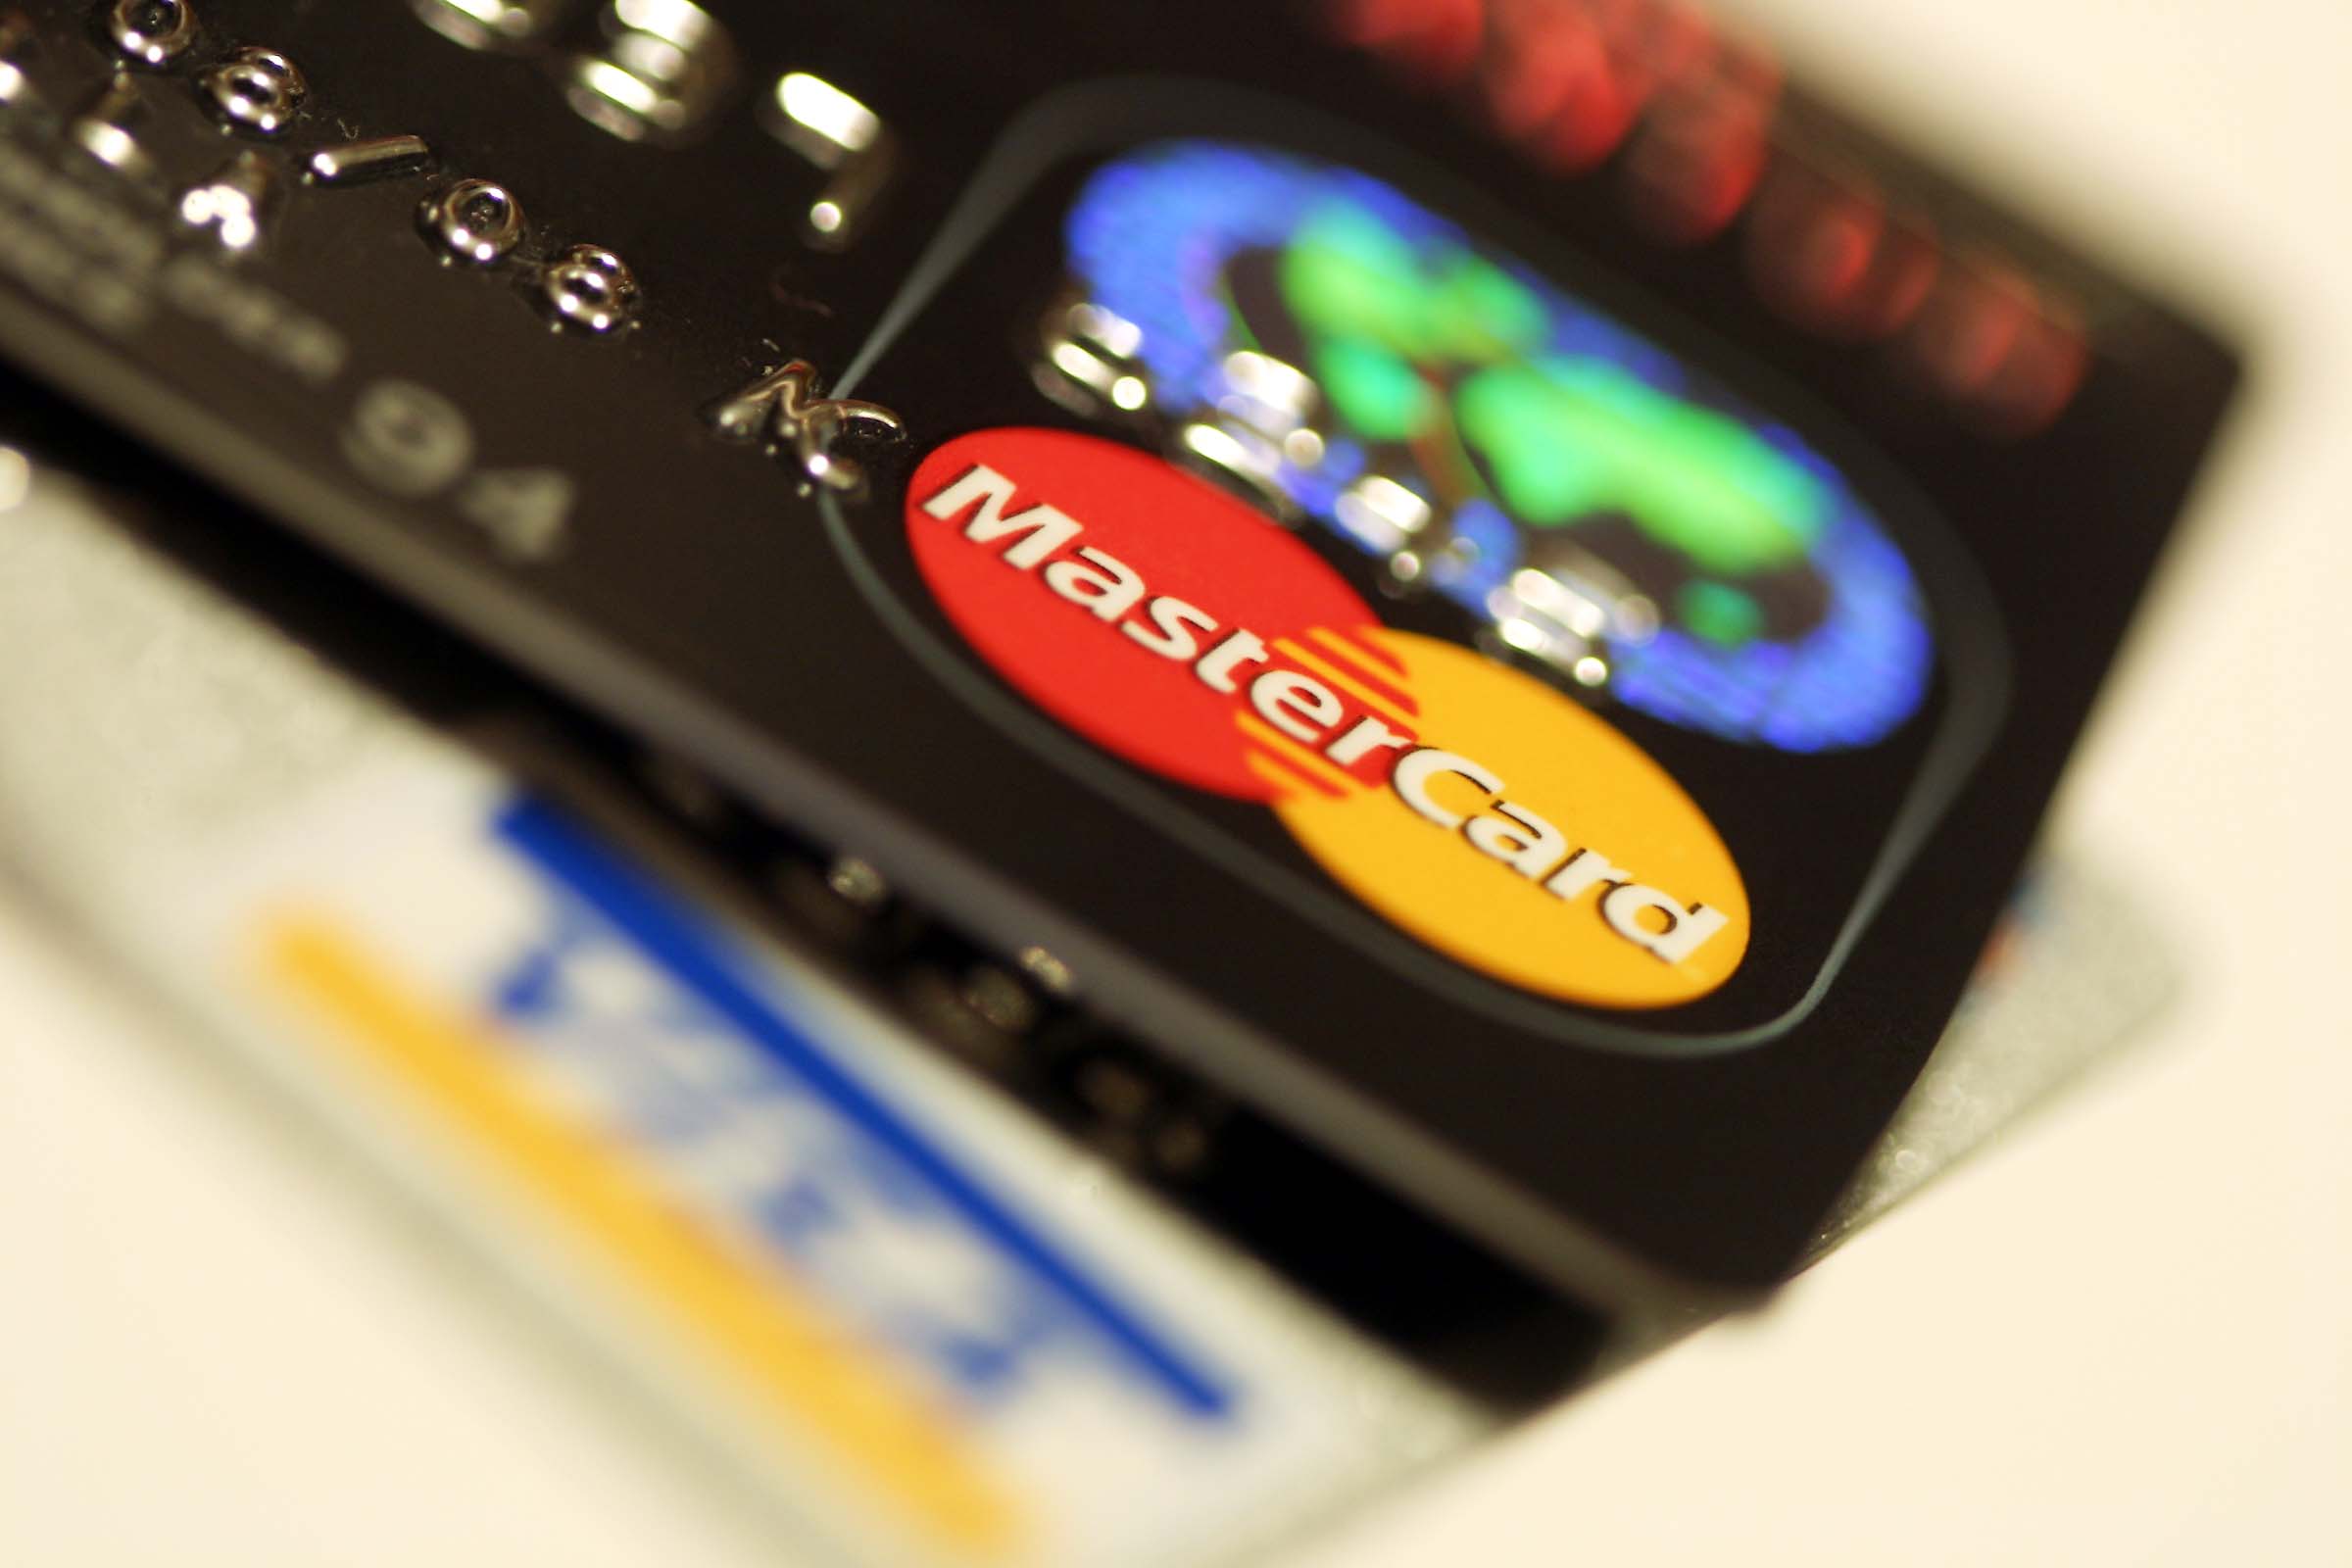 Know all about the features of the OakStone Gold Secured Mastercard®. Source: Freerange.